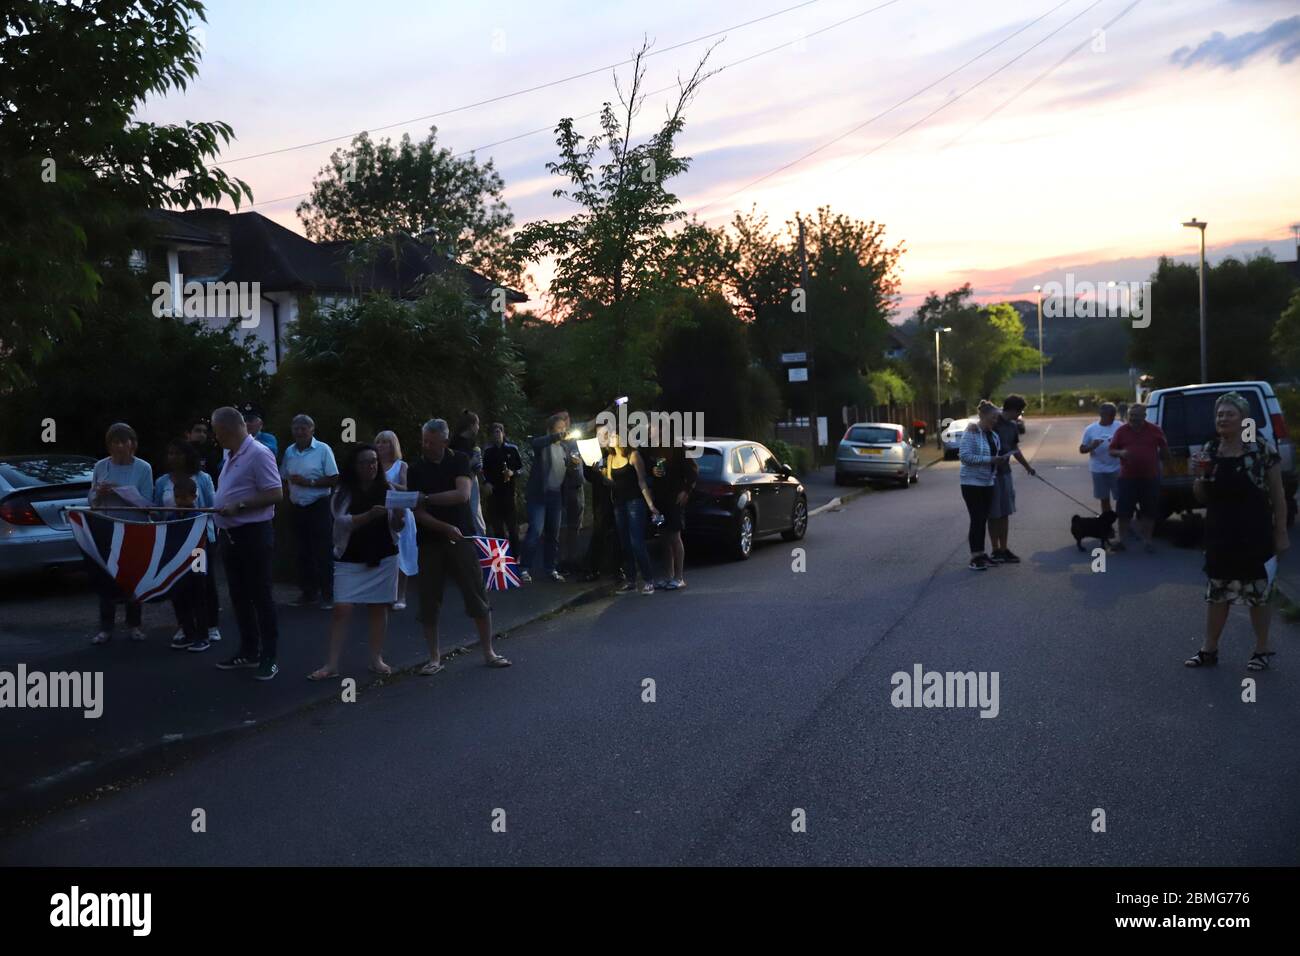 Hertfordshire, UK. 8th May 2020. Residents of Raglan Gardens, Oxhey Hall, gather during lockdown to listen to the Queen's Speech on big speakers followed by singing Dame Vera Lynn's We'll Meet Again and God Save The Queen. The residents of the whole street gathered around No12 who had organised the event to mark the 75th Anniversary of VE Day 8th May 2020 Credit: Ayeesha Walsh/Alamy Live News Stock Photo